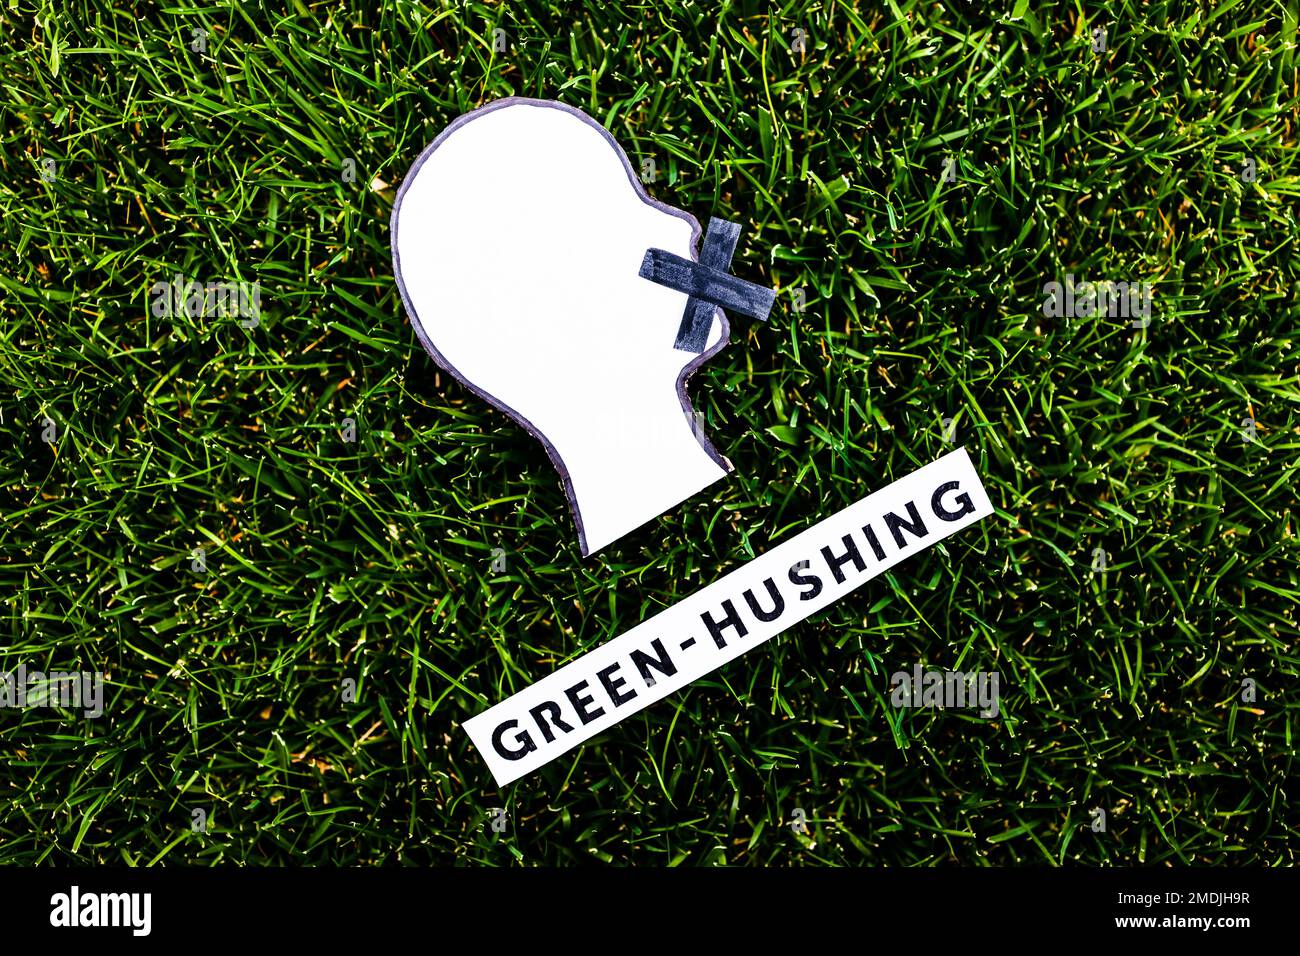 green-hushing concept about companies staying silent about their environmental footprints and policies, text and face with  mouth shut on green grass Stock Photo